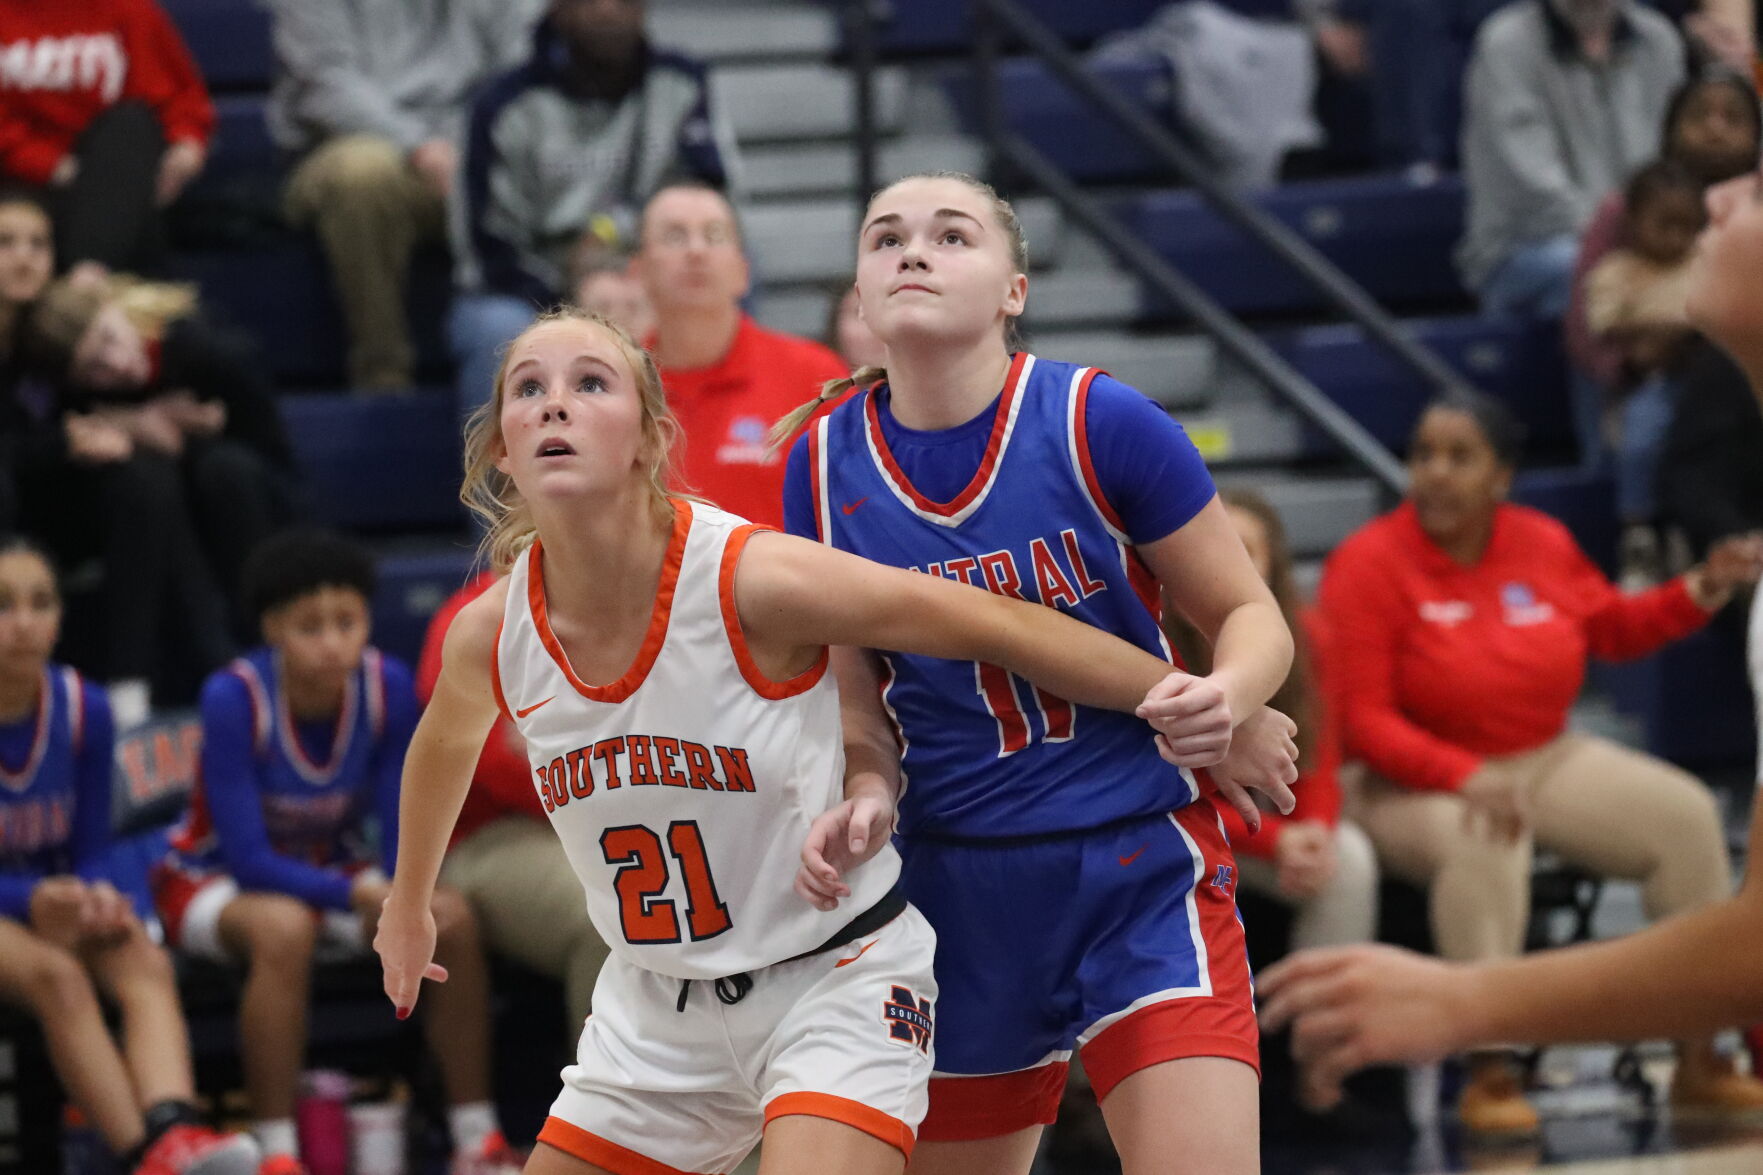 11th Region Girls Basketball Tournament: Central, Southern Ready for Postseason Rematches